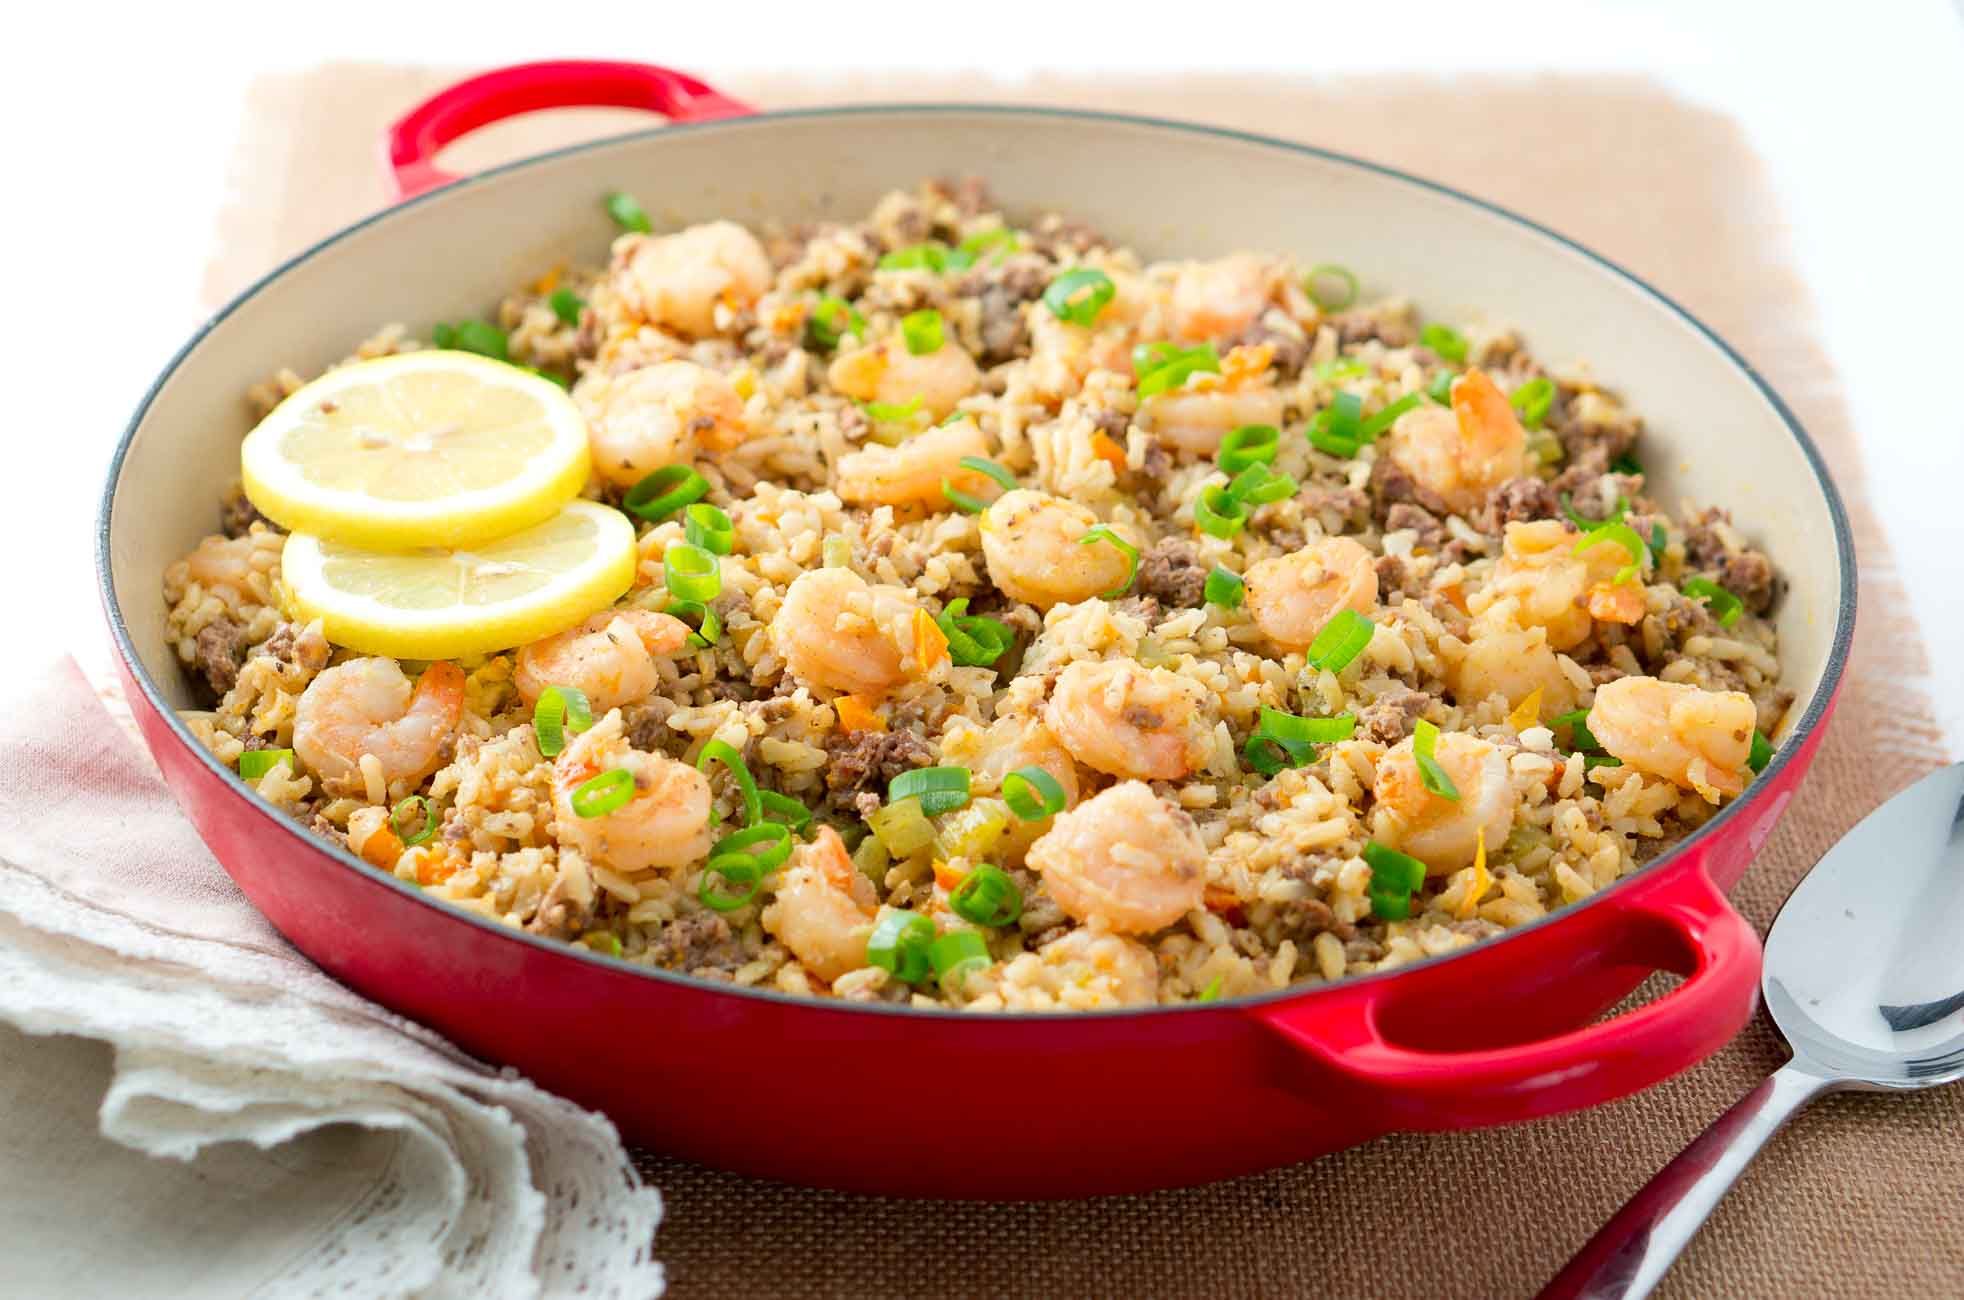 Easy Dirty Rice with Shrimp - A healthy twist on a Cajun classic. The addition of shrimp turns this into a fabulous main dish. Easy to make and very flavorful!